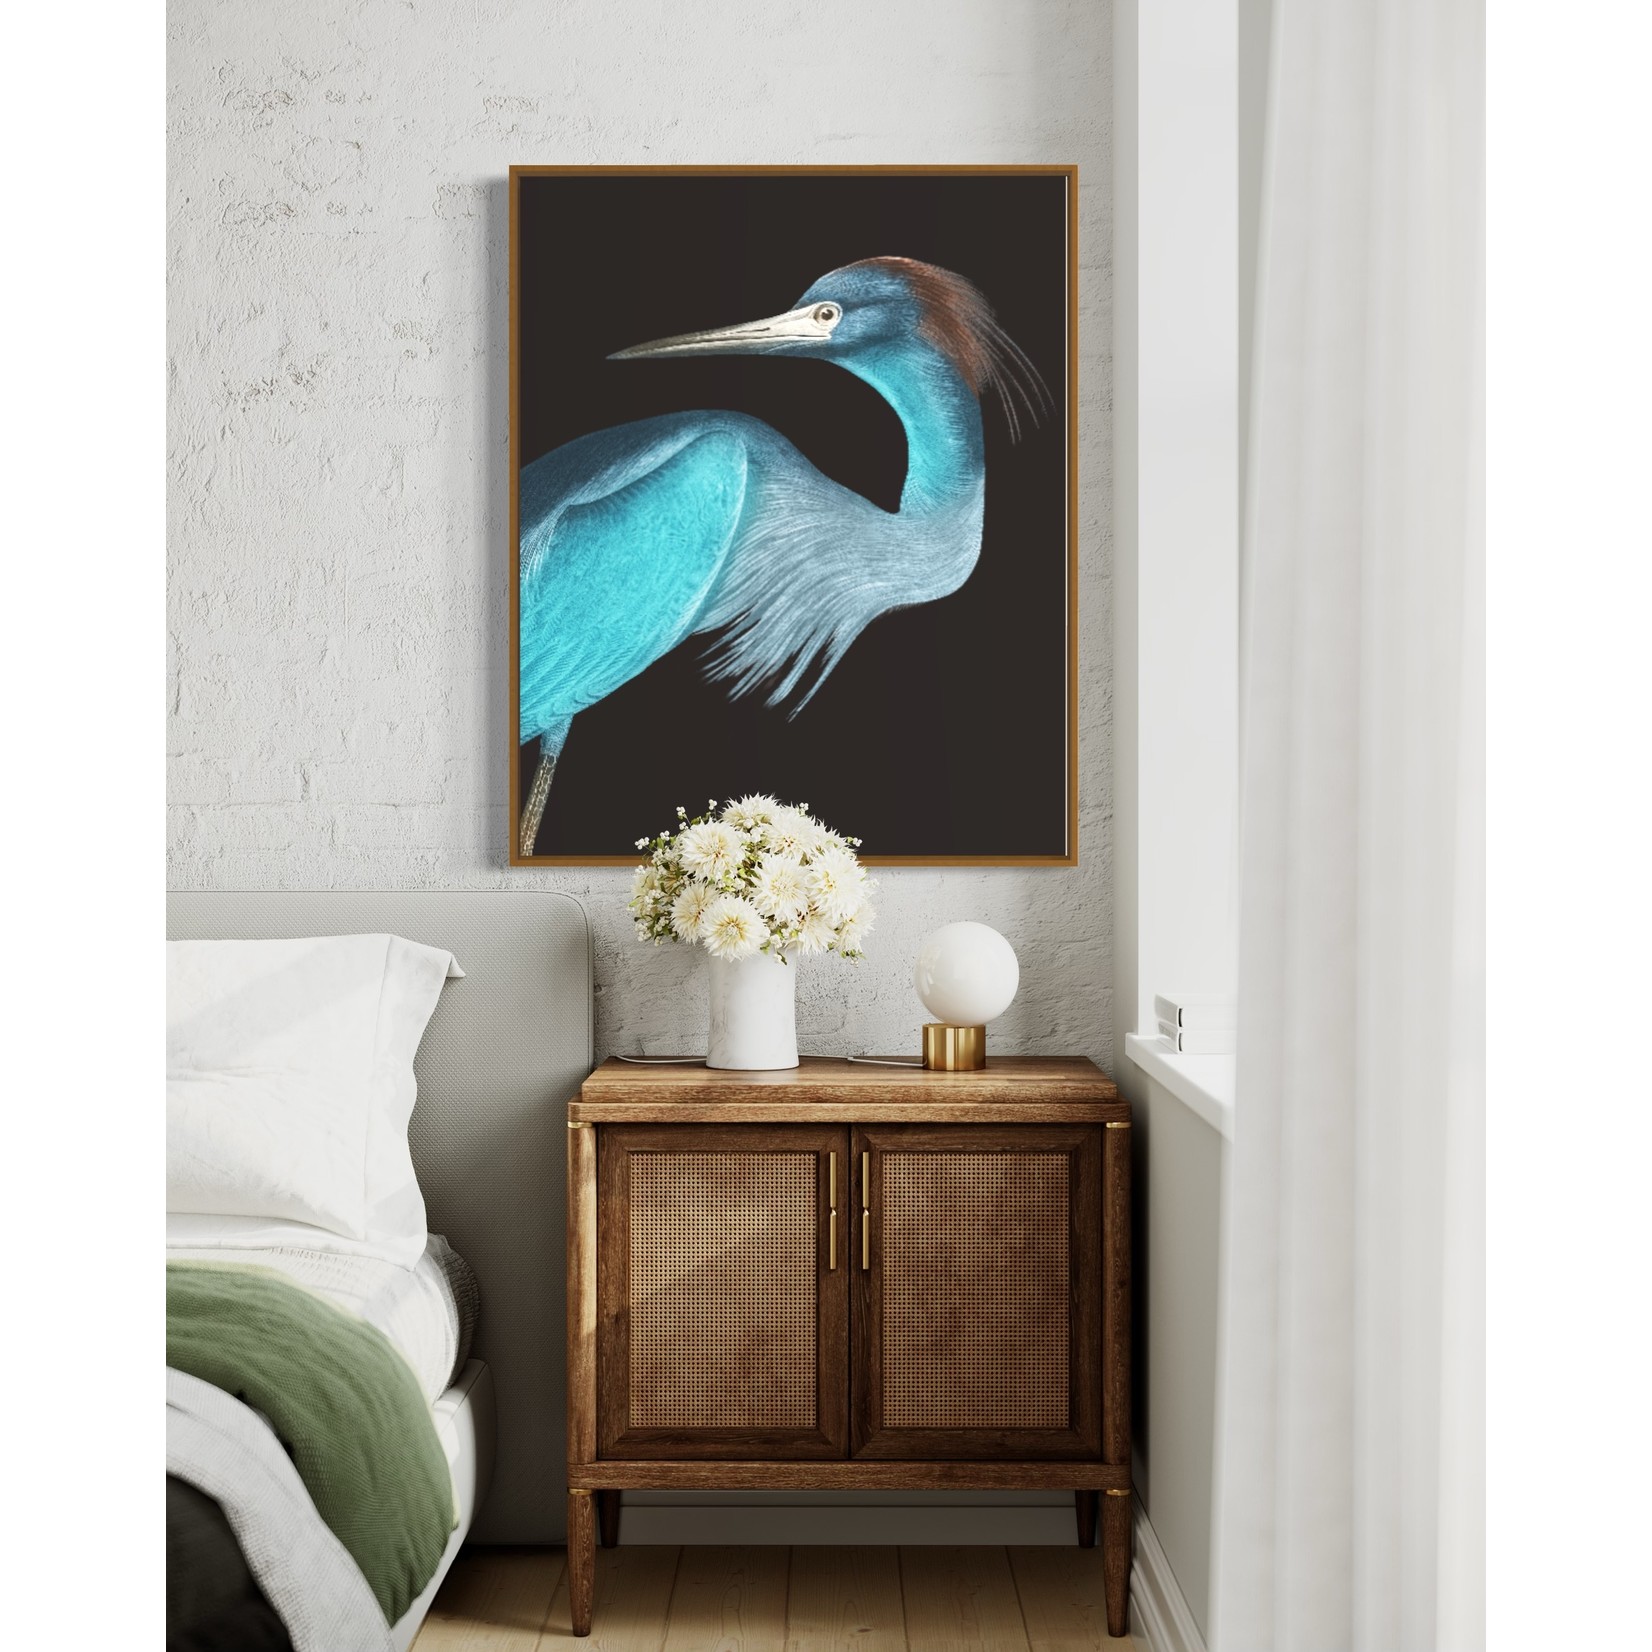 Framed Print on Canvas: Blue Crane ( Rectangular)  Canvas with a Brushed Gold Floater frame  33 x 41 inches high inches